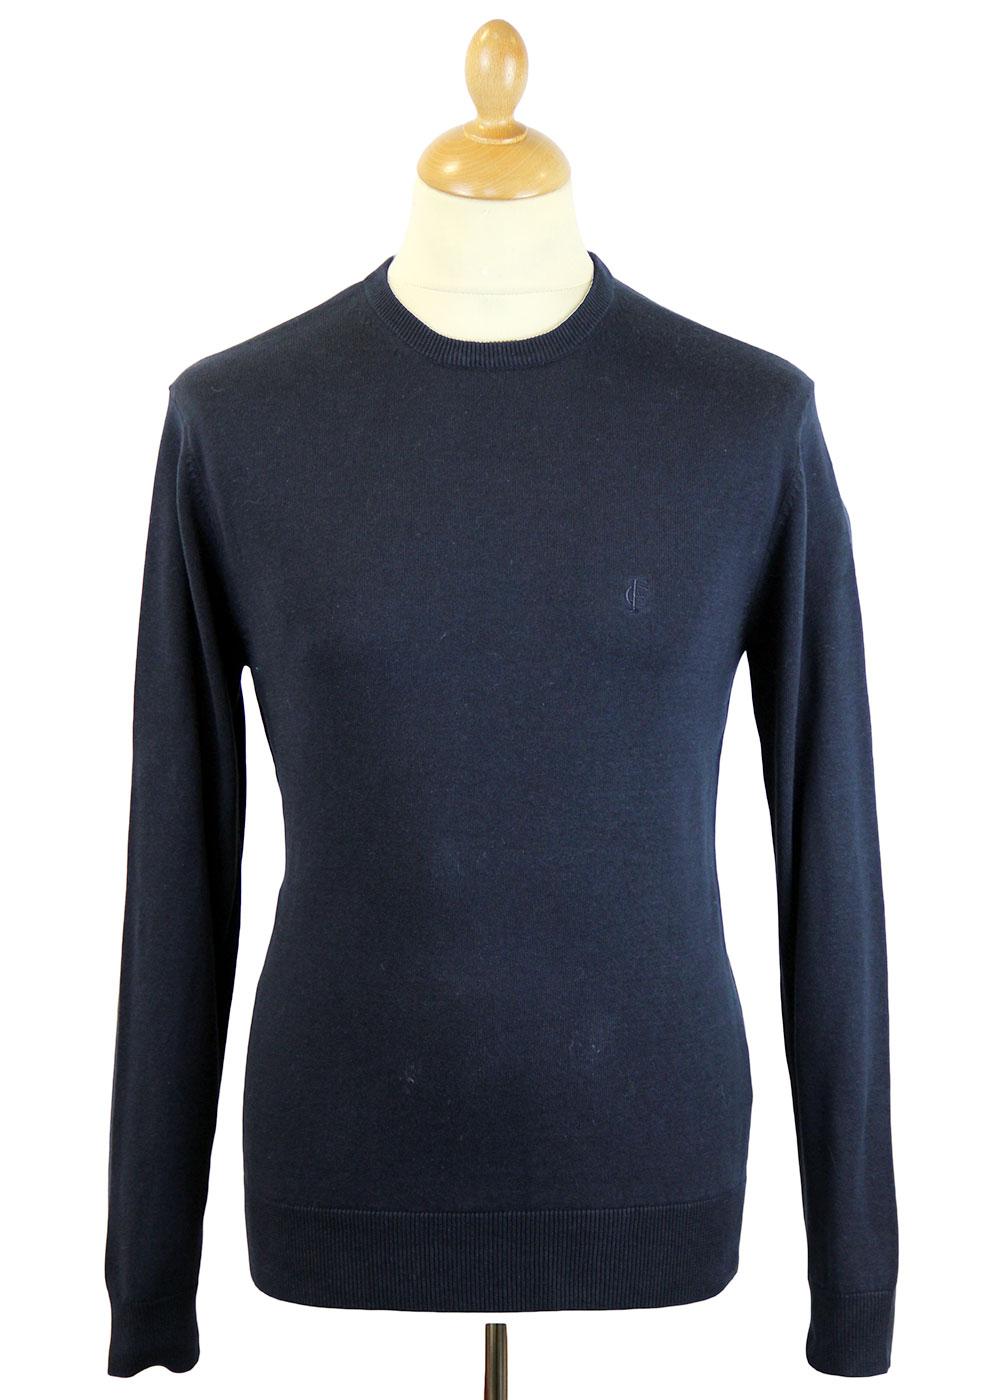 Auderly FRENCH CONNECTION Cotton Crew Neck Jumper